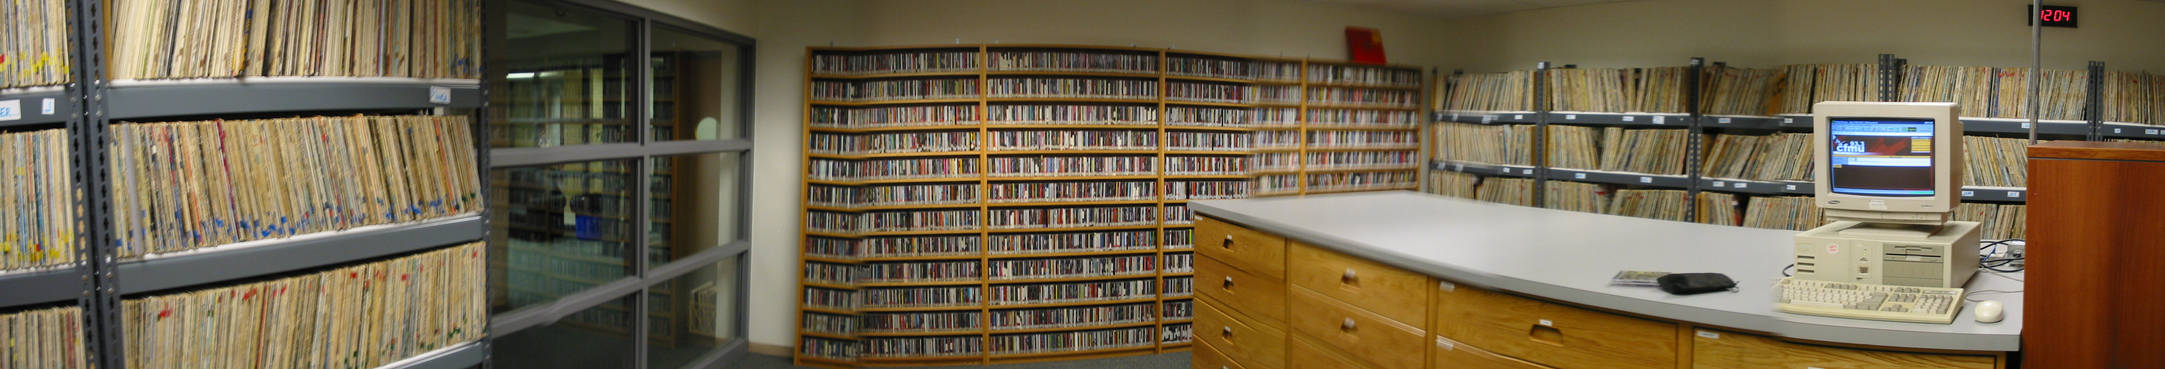 Wide angle record library